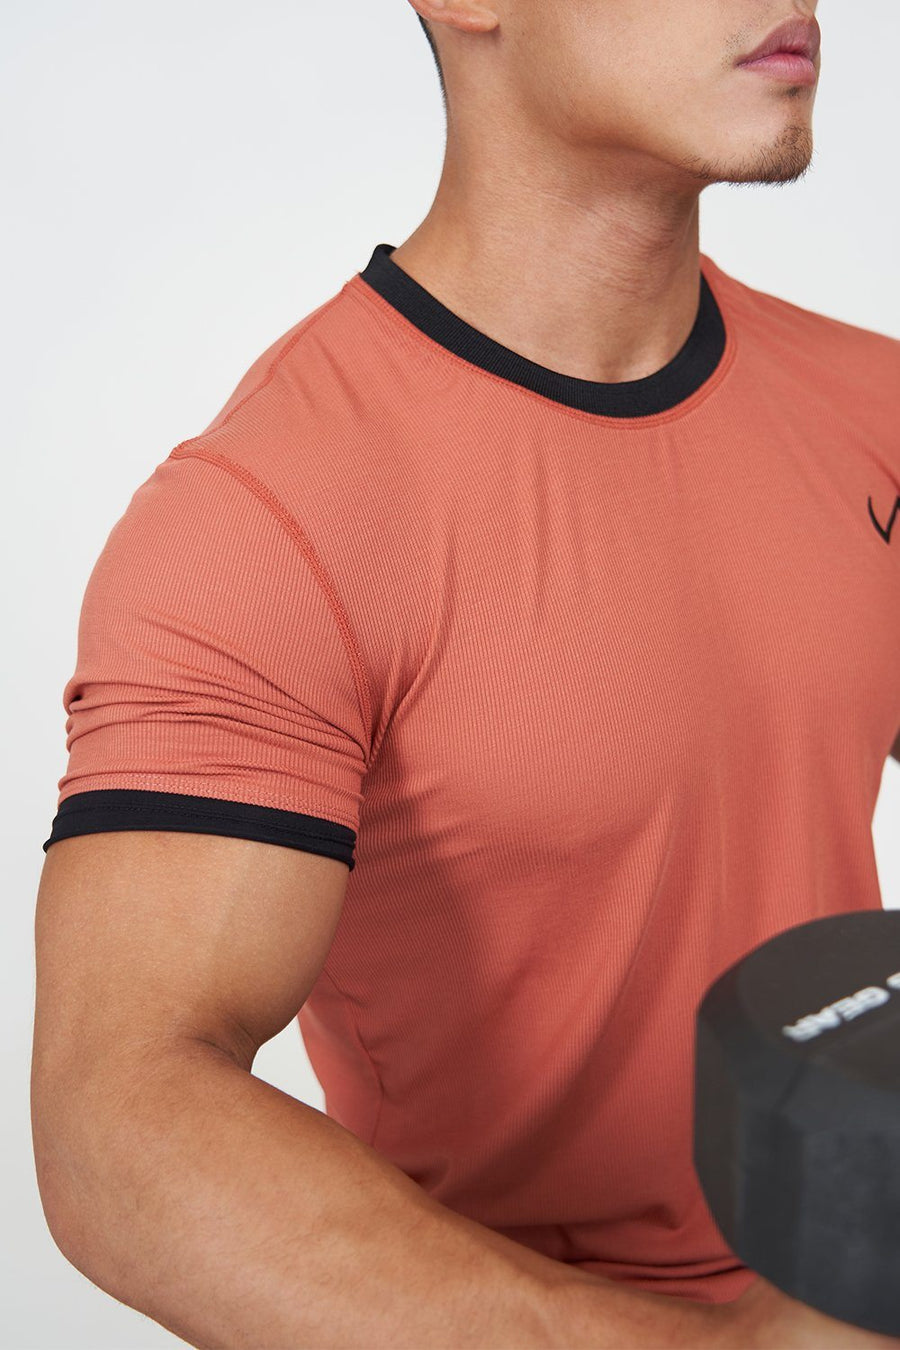 TLF Surge Classic Tee | Men's Ribbed Muscle Shirt - Red -4